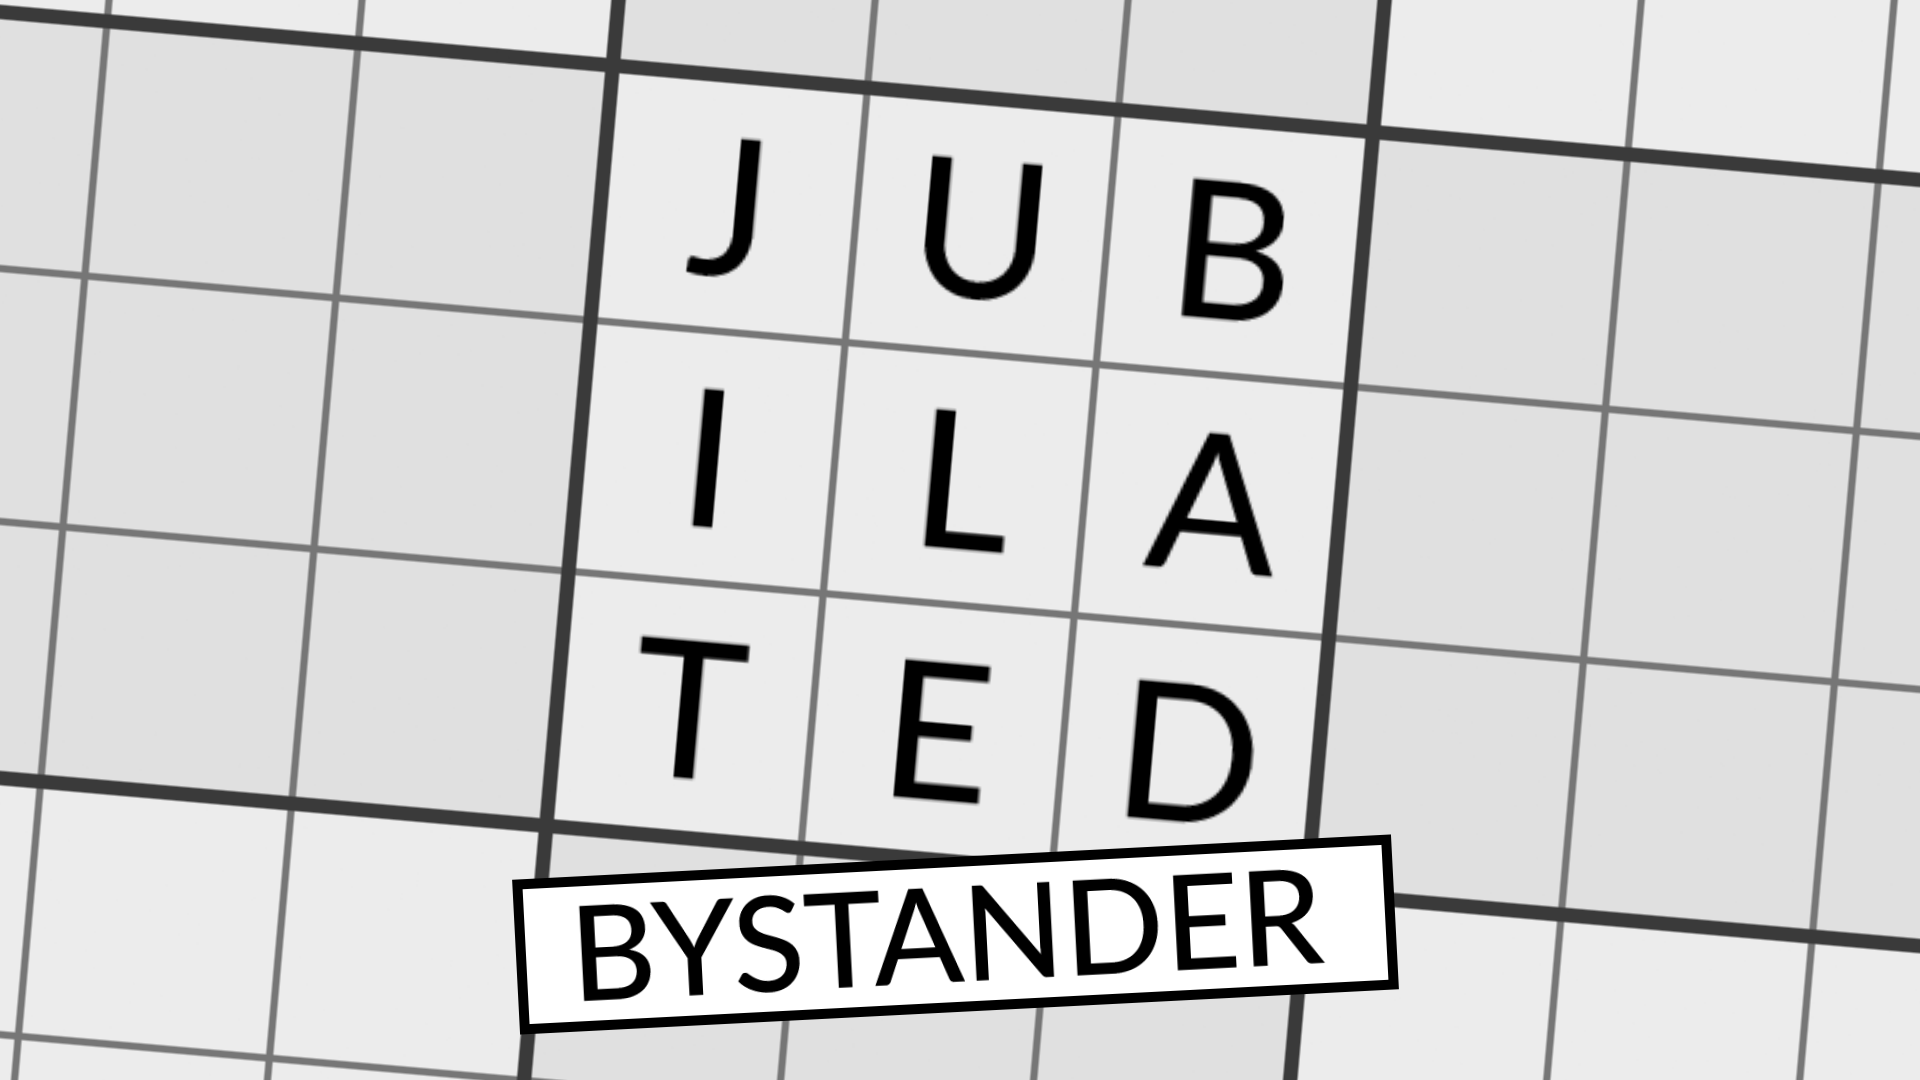 Icon for Jubilated Bystander